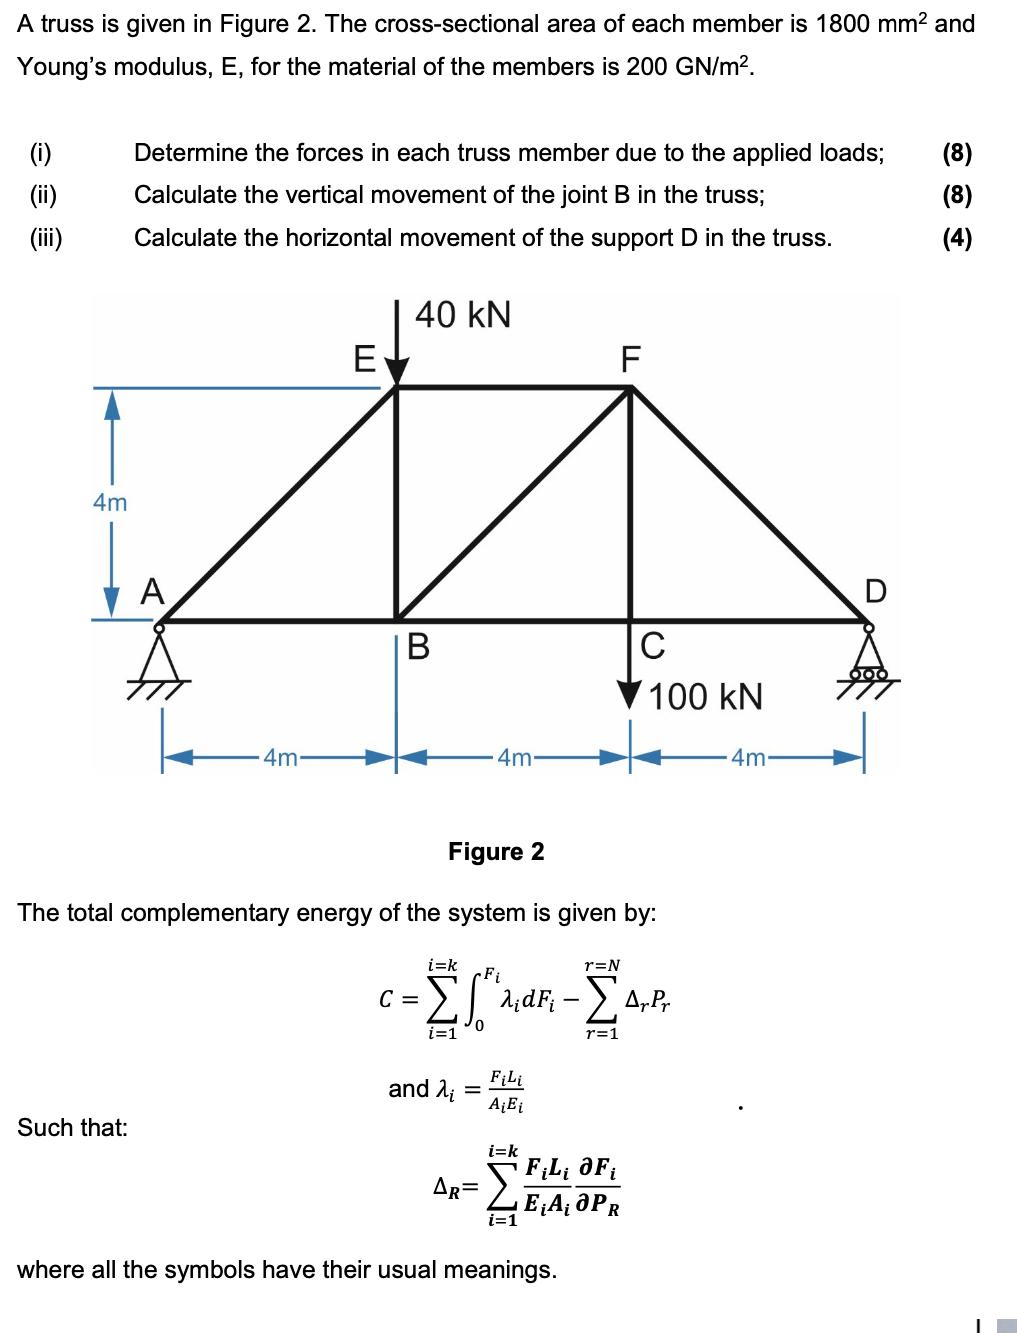 A truss is given in Figure 2. The cross-sectional area of each member is 1800 mm and Young's modulus, E, for